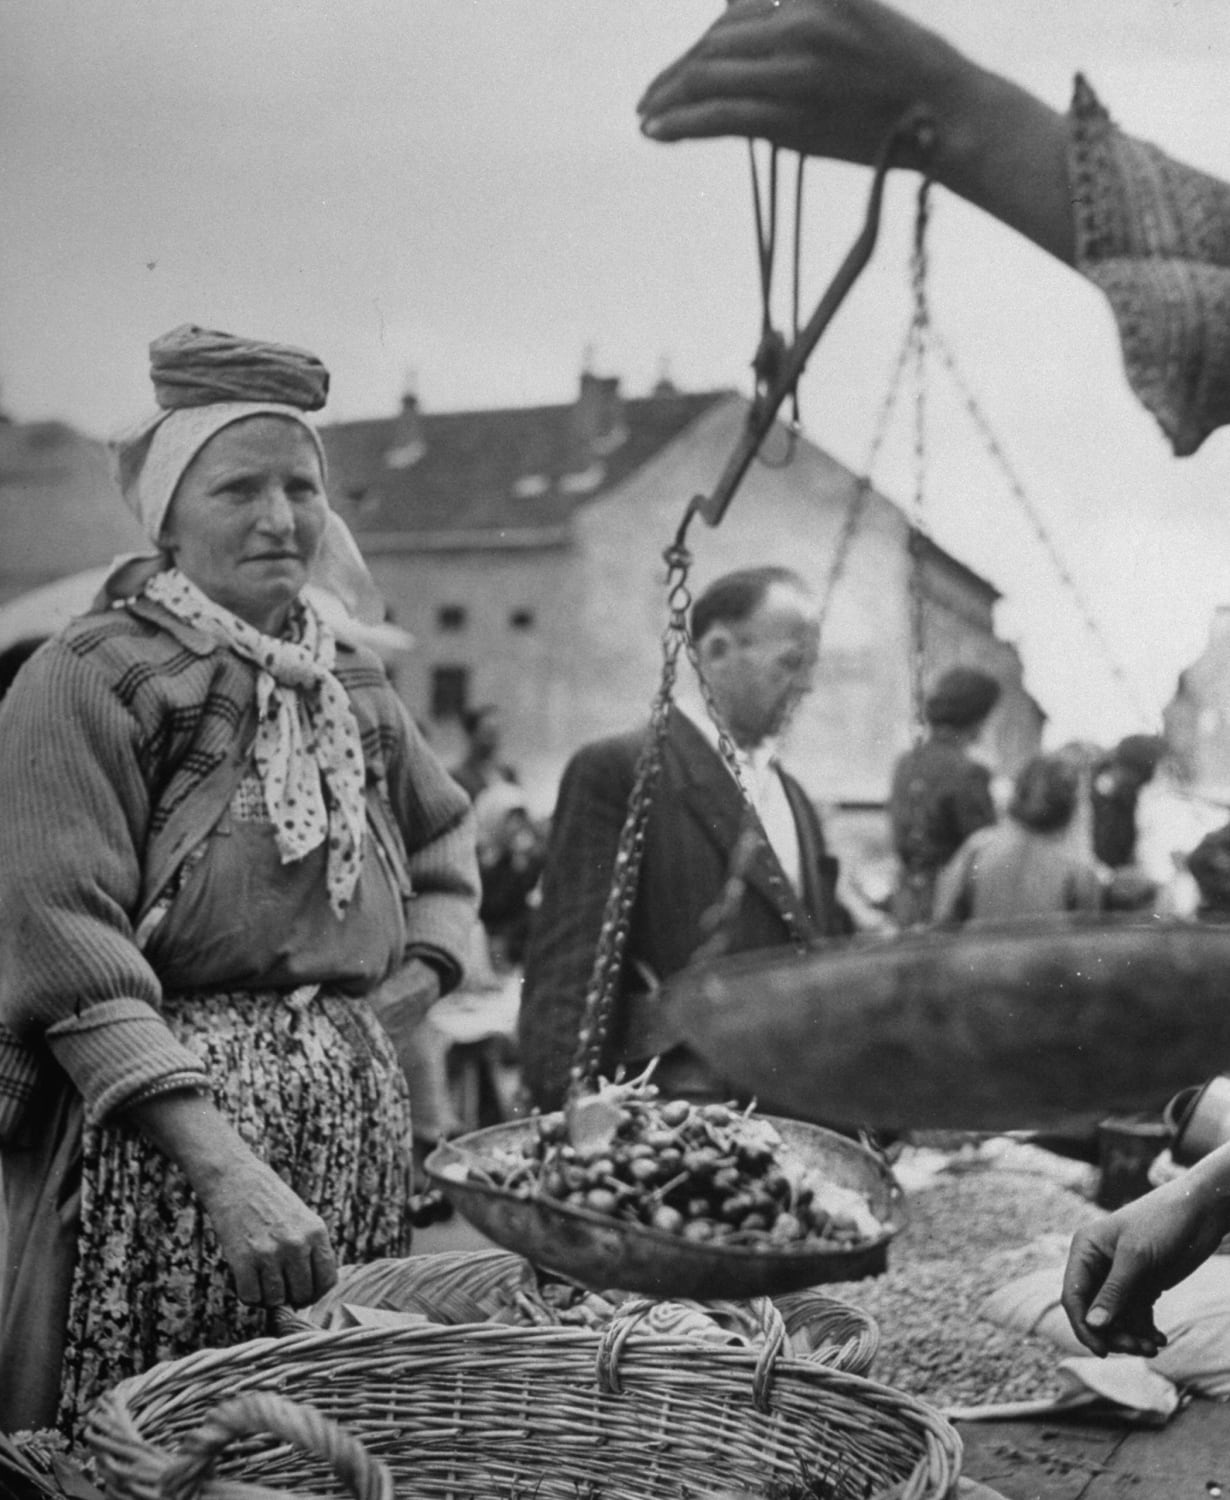 A woman watching as the cherries are being weighed at the market (Zagreb, Yugoslavia 1948)